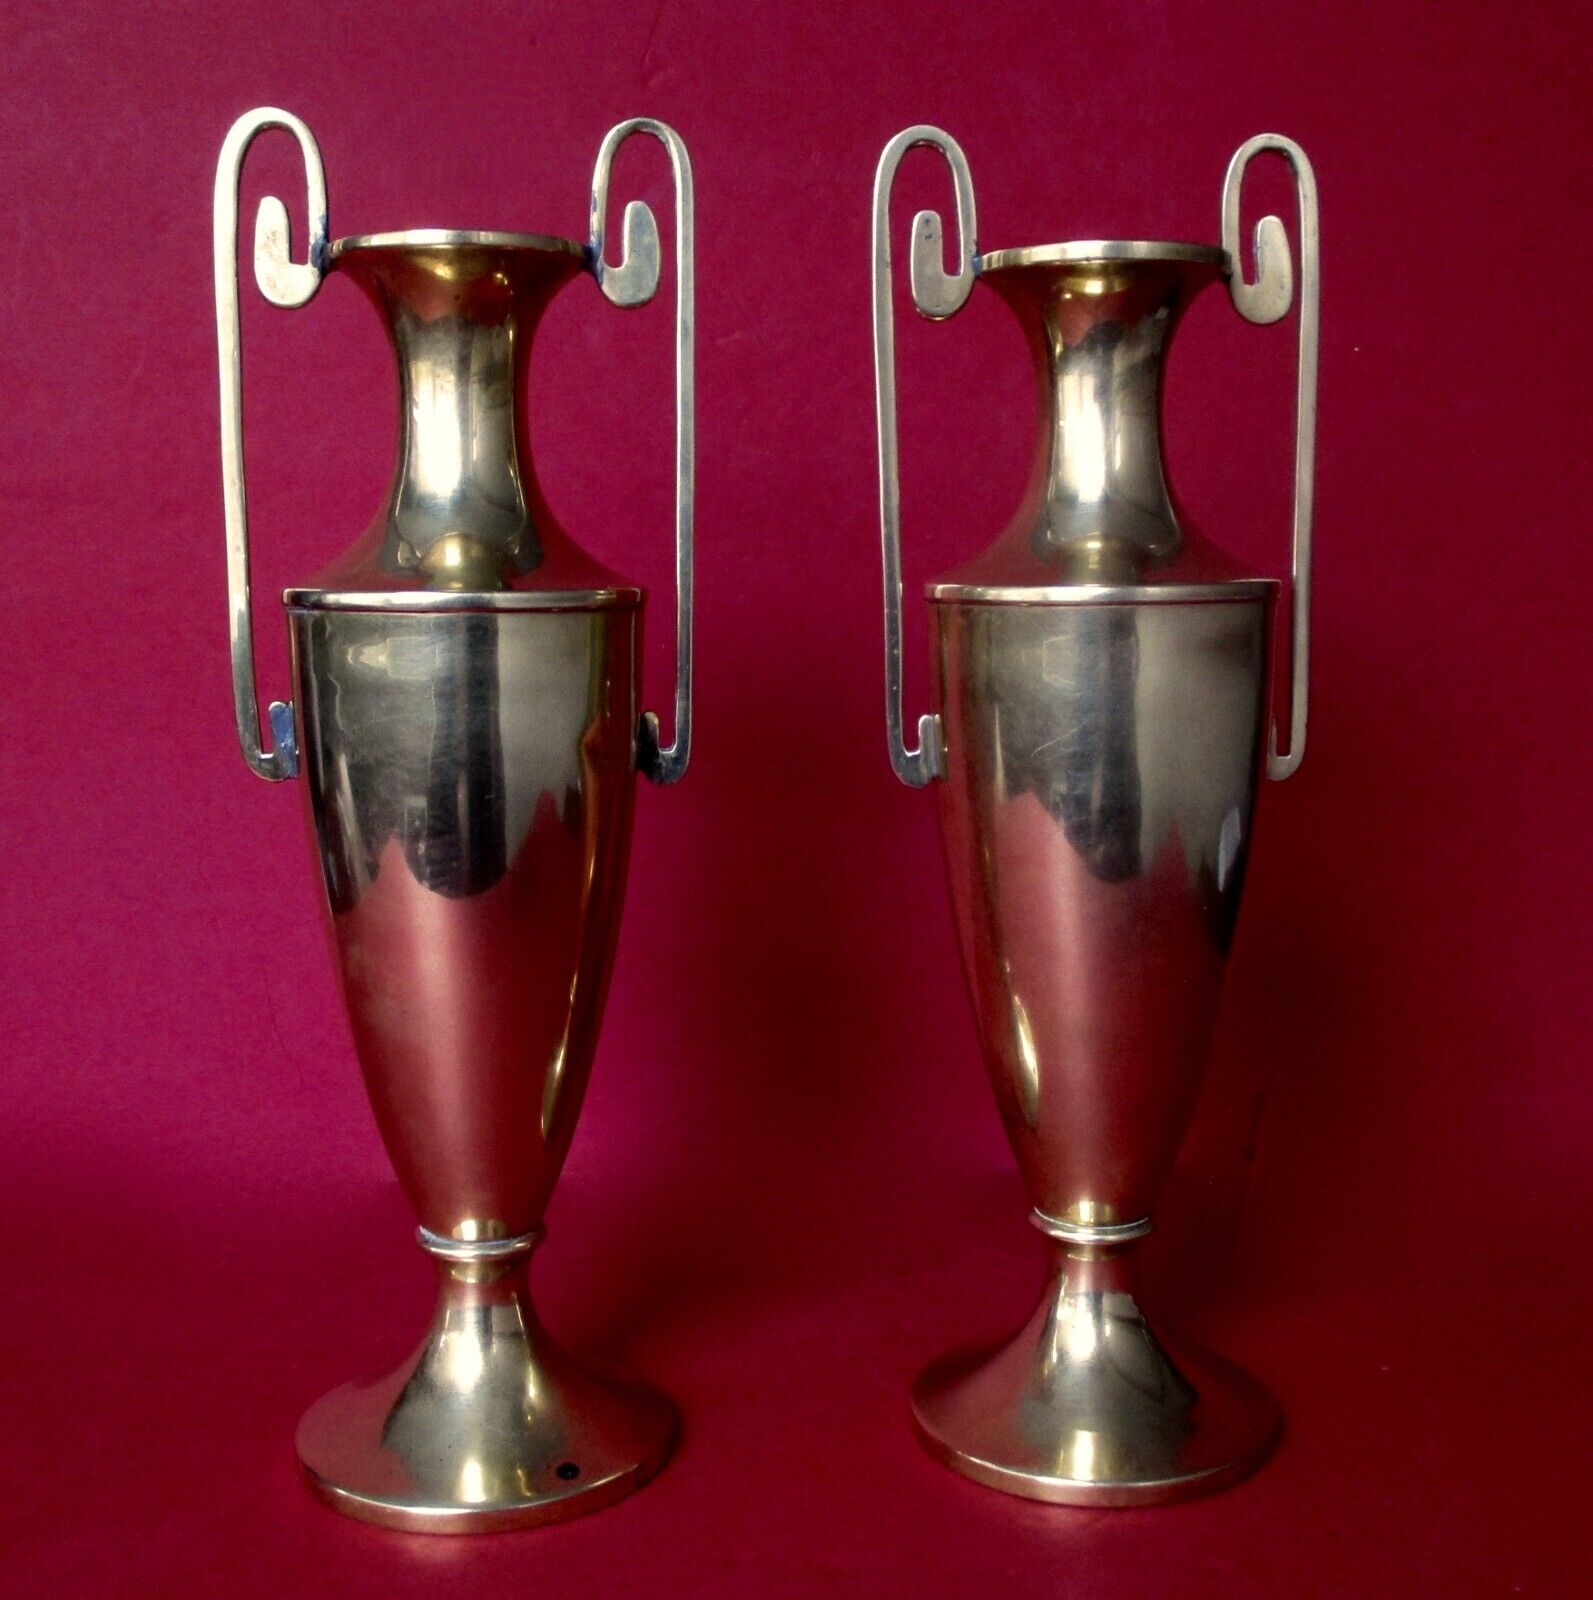 Vintage Pair of 11-Inch Brass Vases With Handles